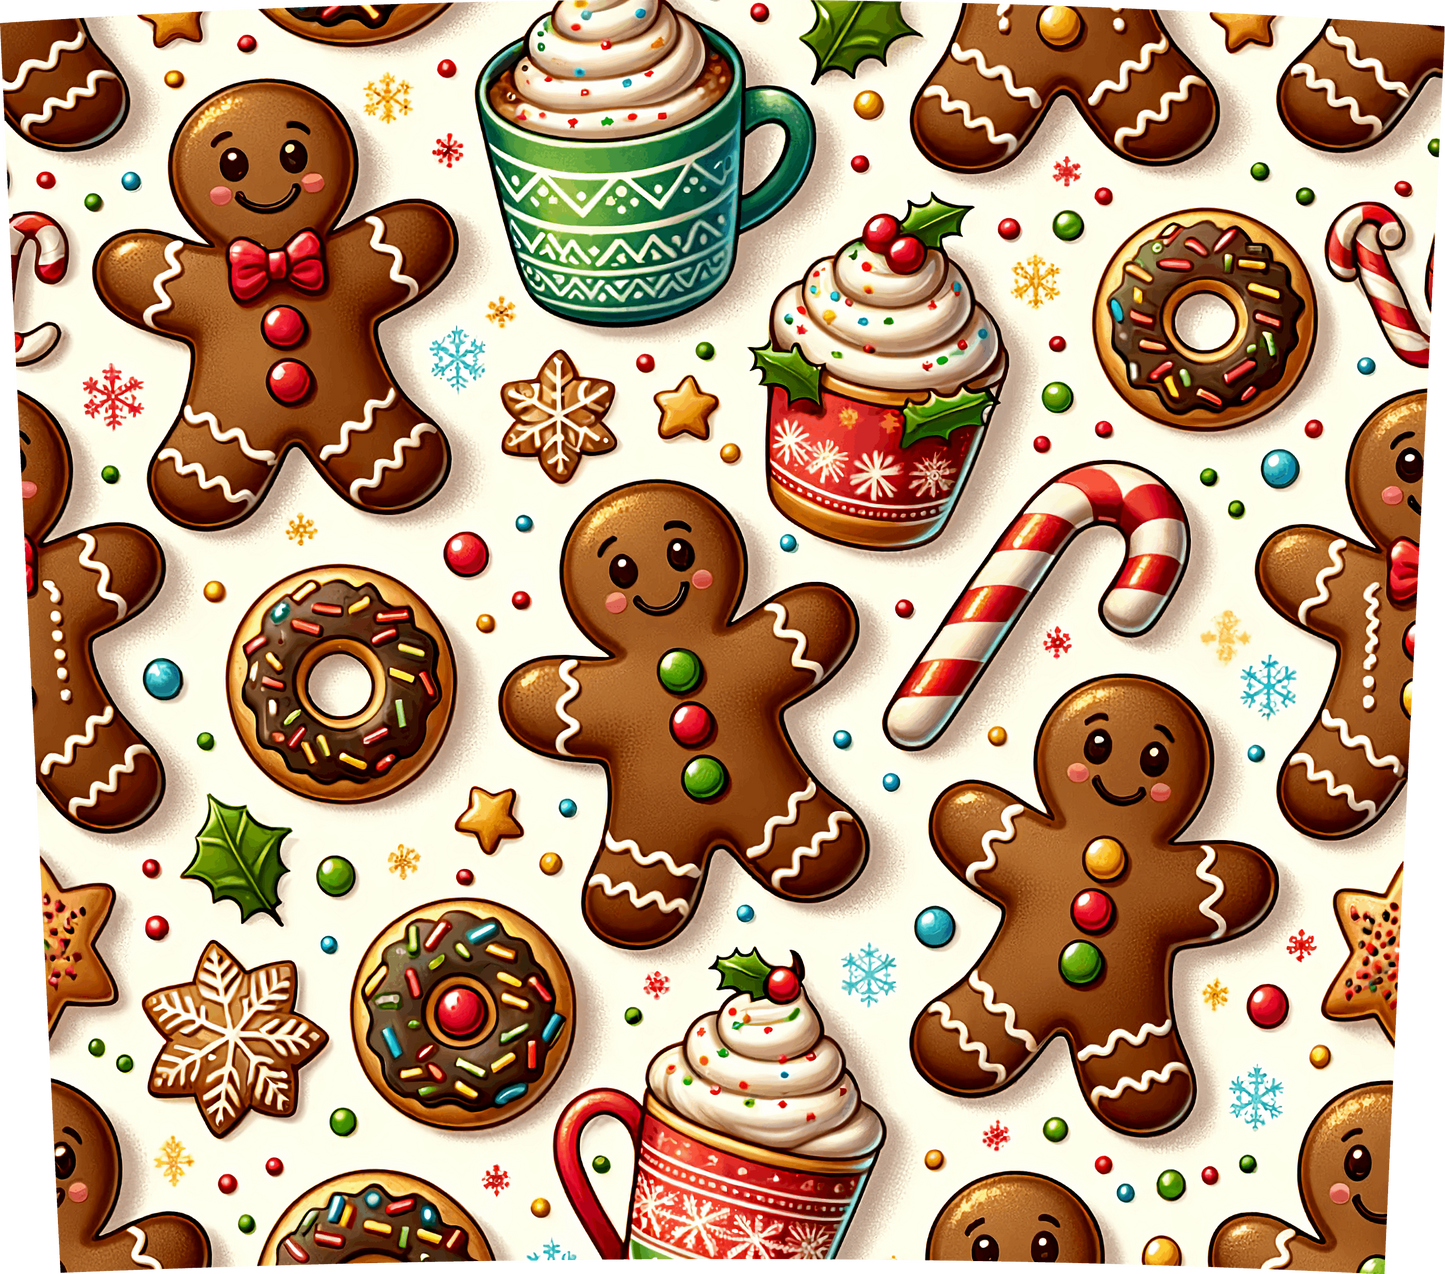 GINGERBREAD MAN COOKIES AND DONUTS